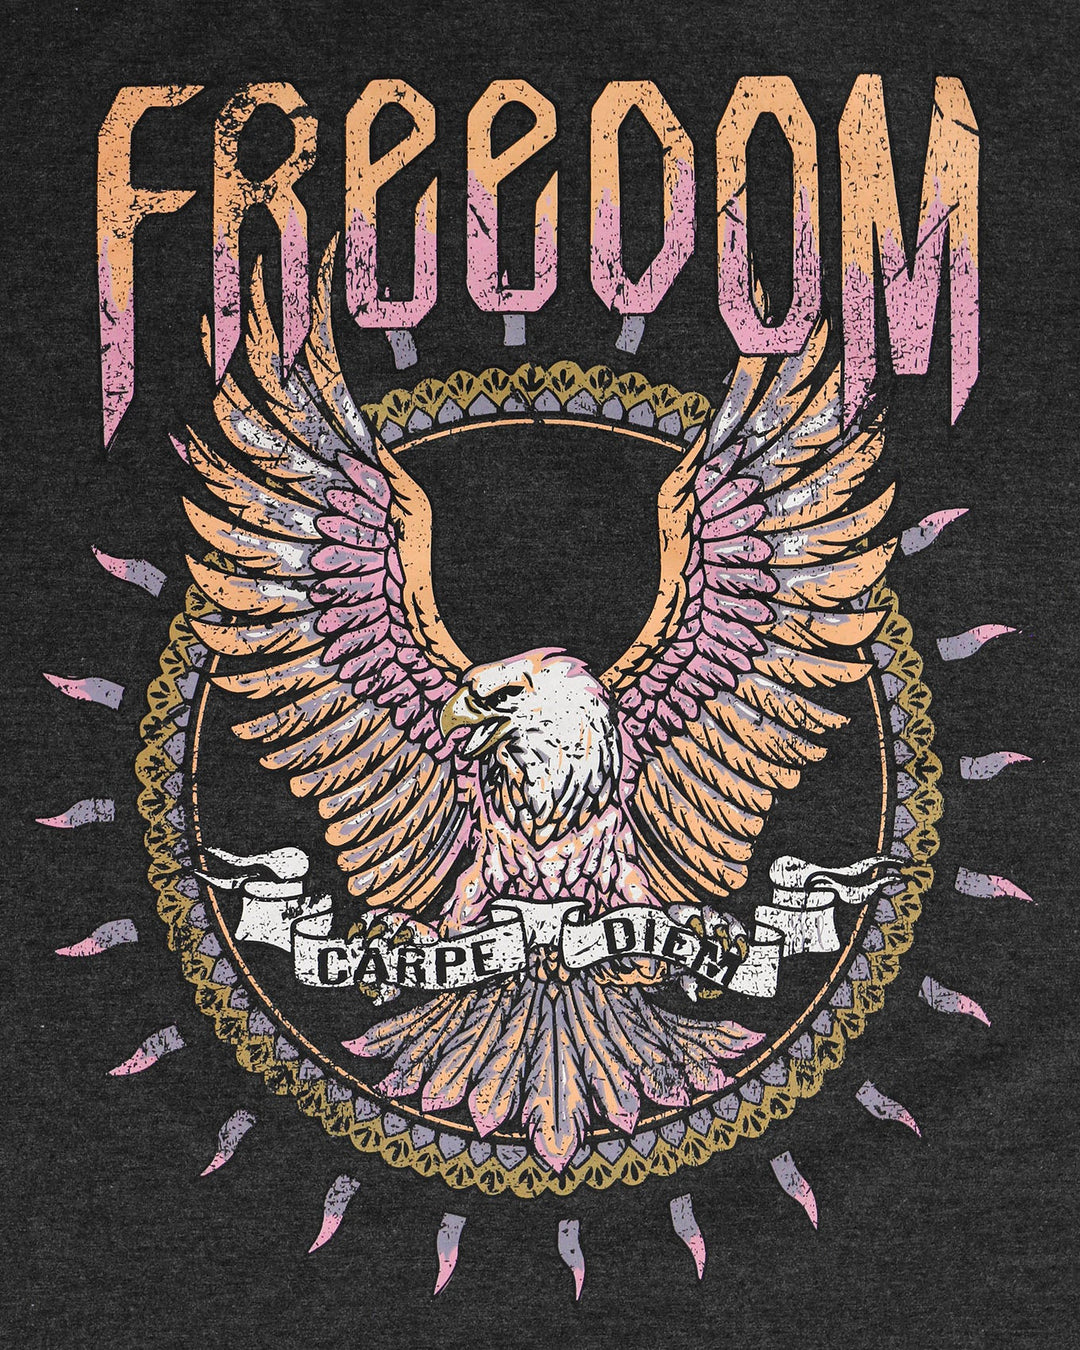 Grace and Lace | Girlfriend Fit Graphic Tee | Freedom